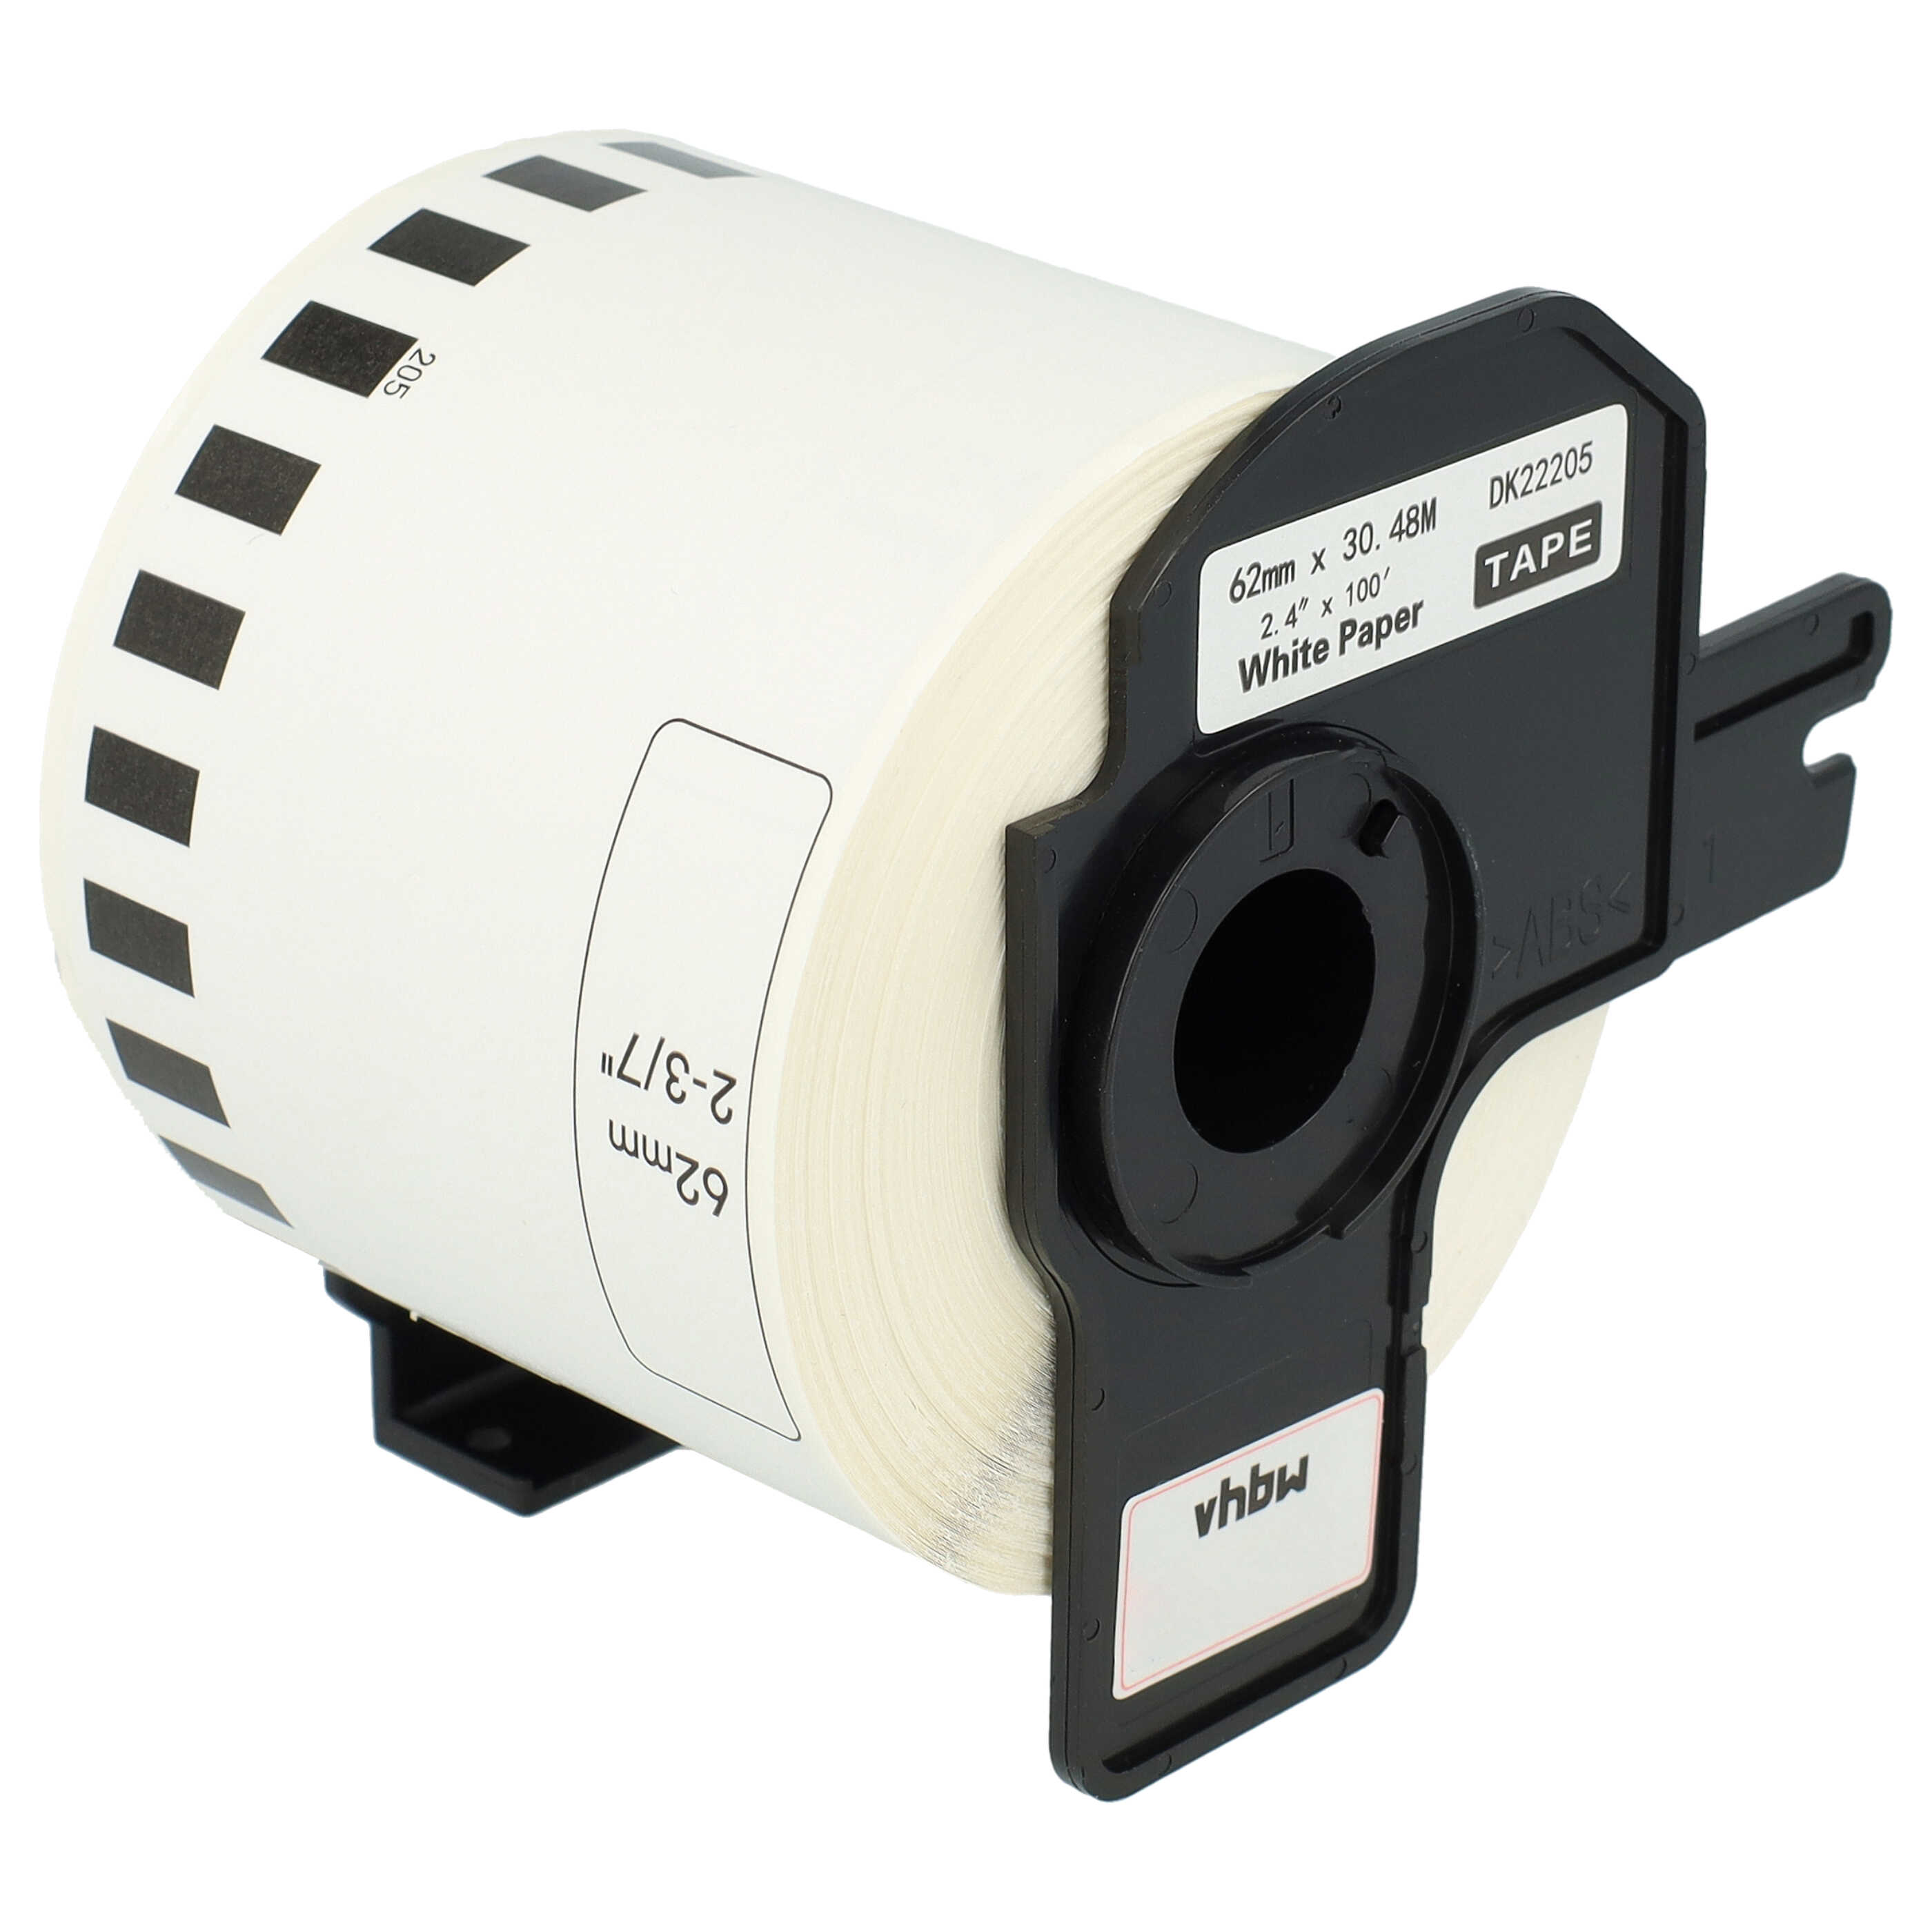 Labels replaces Brother DK-22205 for Labeller - 62 mm x 30.48m + Holder